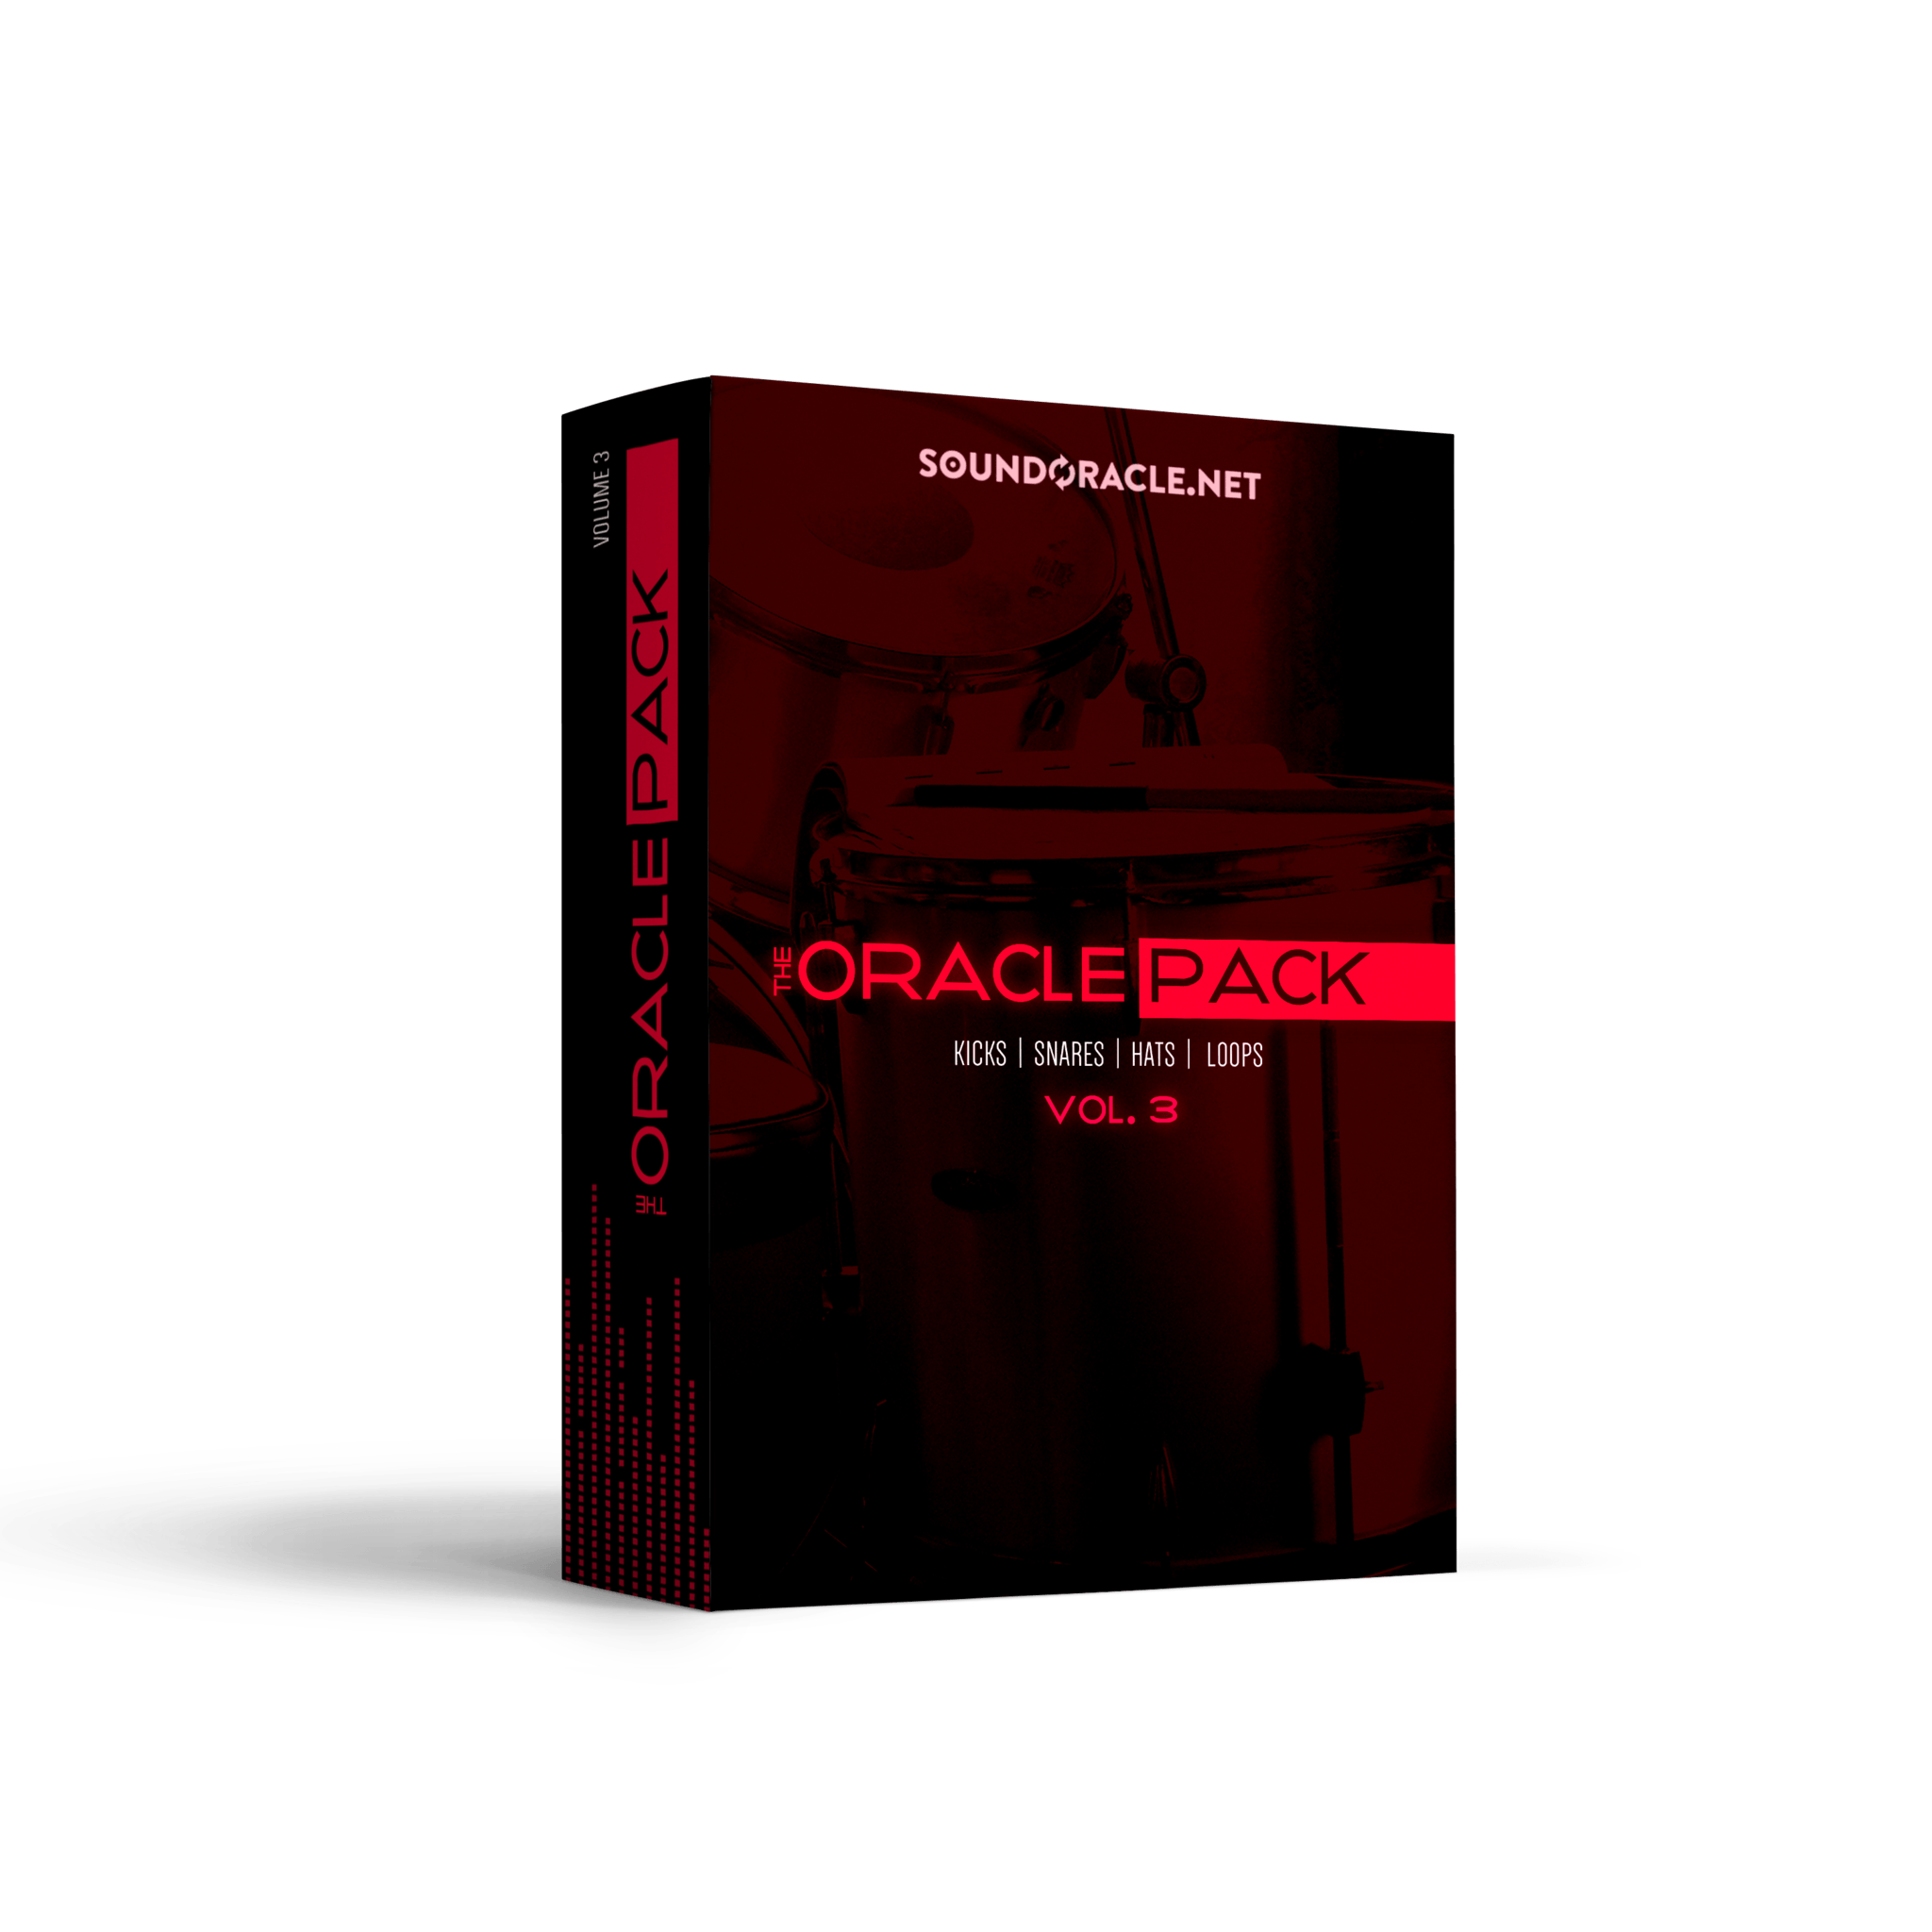 The Oracle Pack Vol. 3 - Soundoracle.net